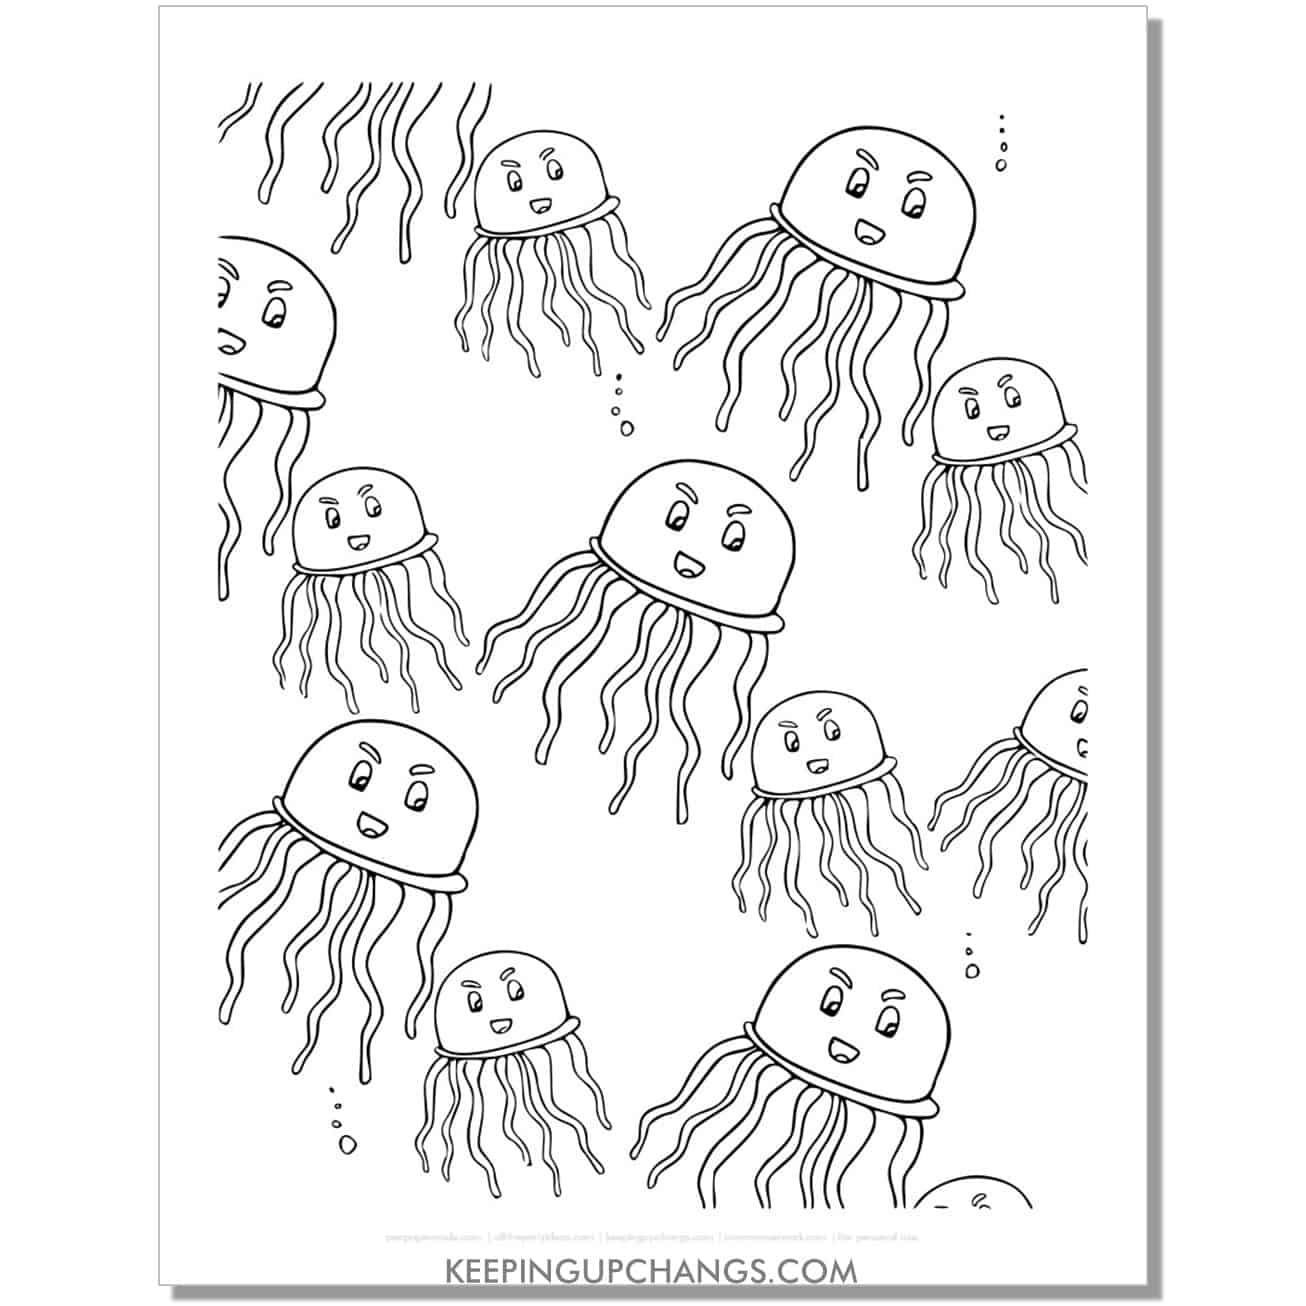 free angry jellyfish collage coloring page, sheet.